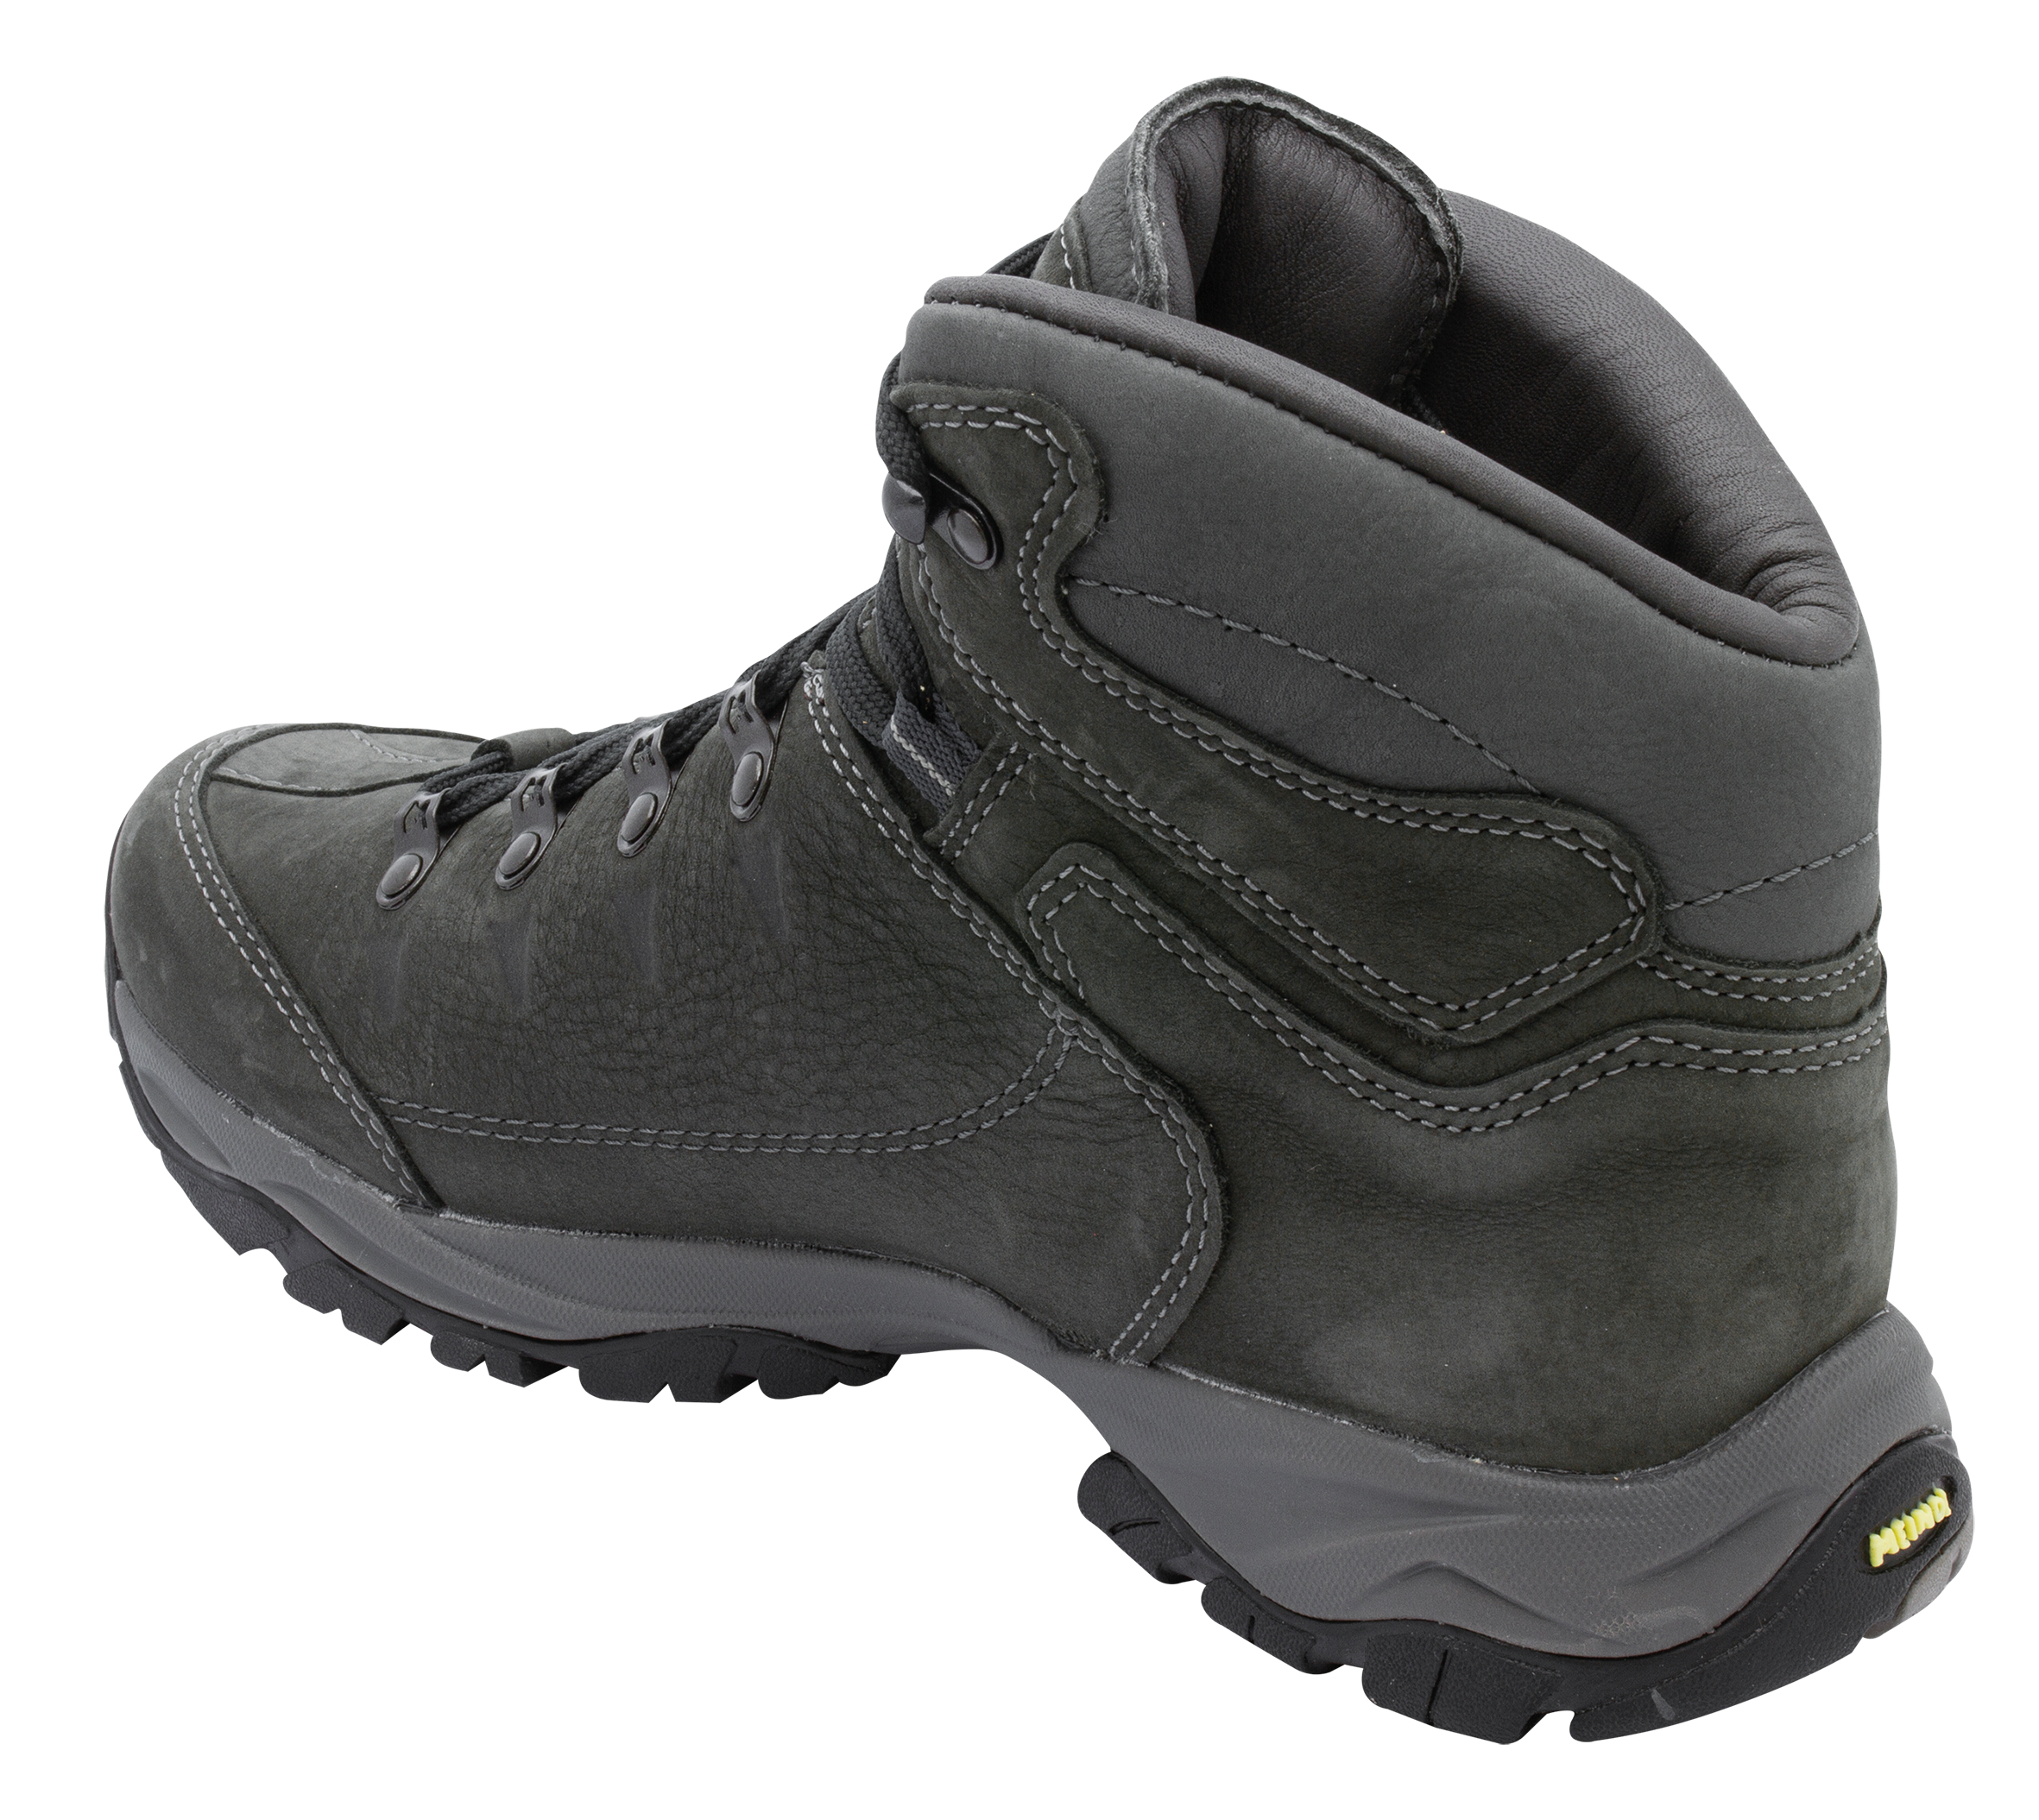 Meindl Ohio 2 GTX hiking boots anthracite